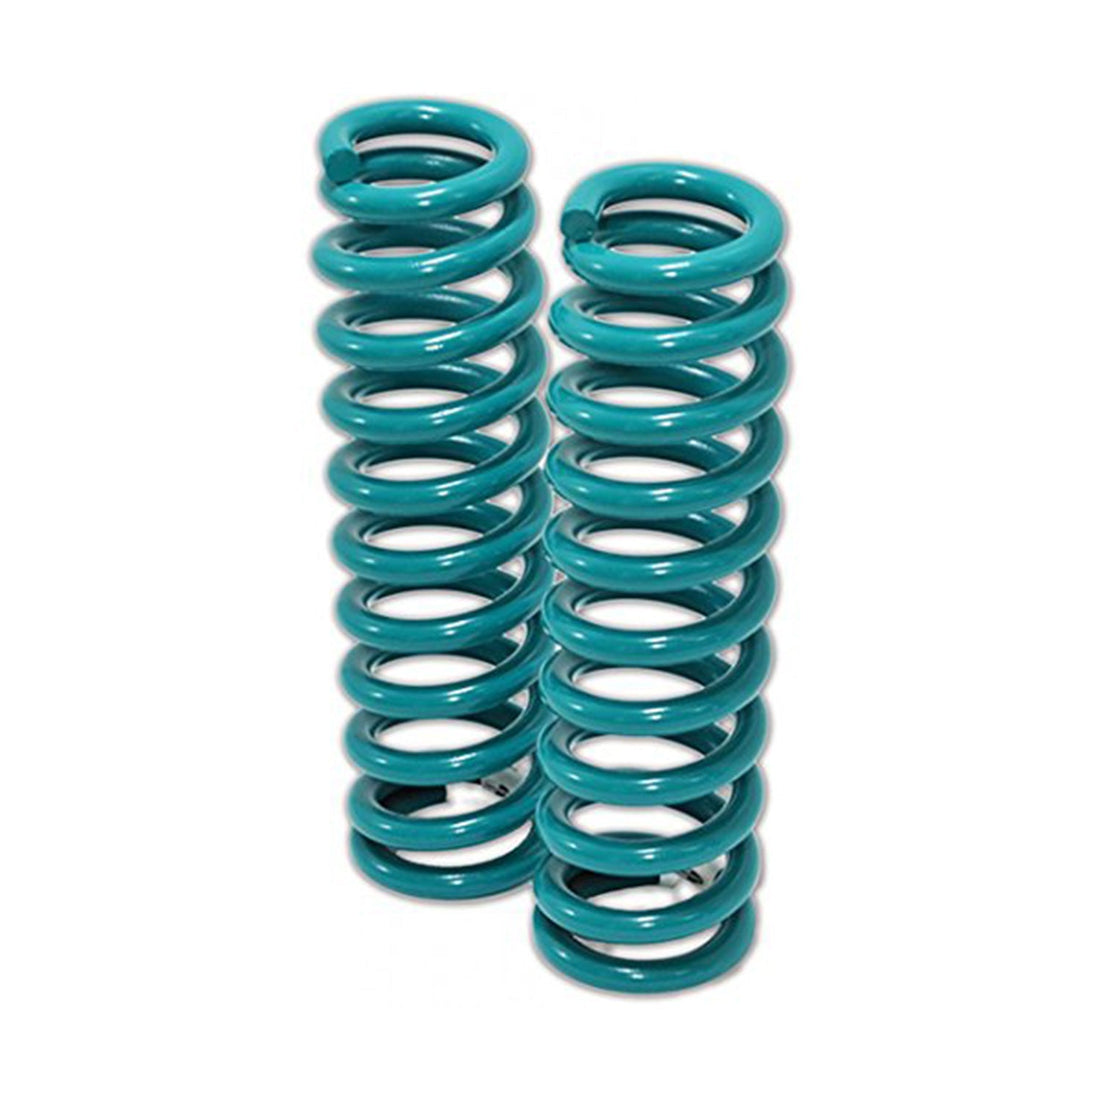 Dobinsons Front Coil Springs for Land Rover vehicles  (C51-042)